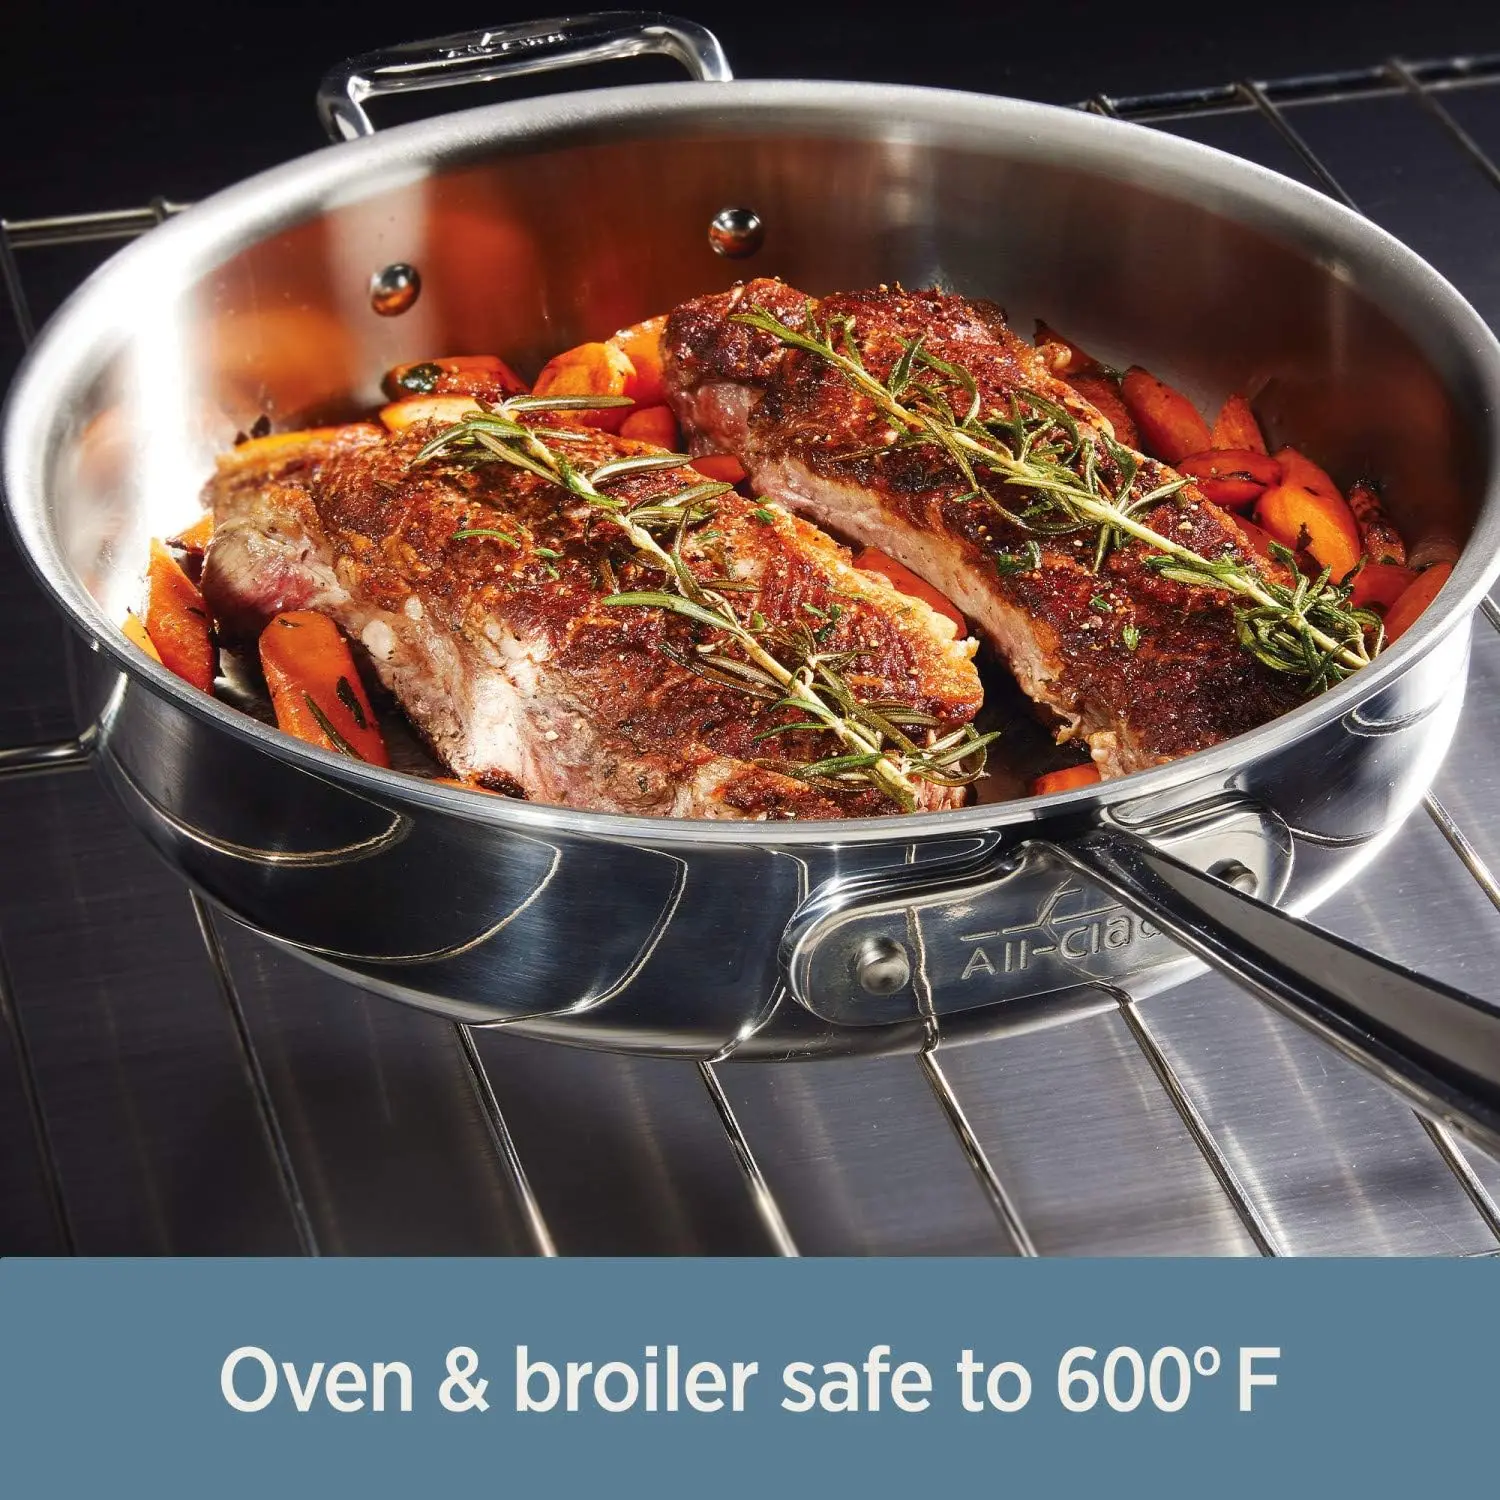 https://ae01.alicdn.com/kf/S8e4652b633464fa99b44be6df1a9c233t/3-Ply-Stainless-Steel-Butter-Warmer-5-Quart-Induction-Oven-Broil-Safe-600F-Pots-and-Pans.jpg